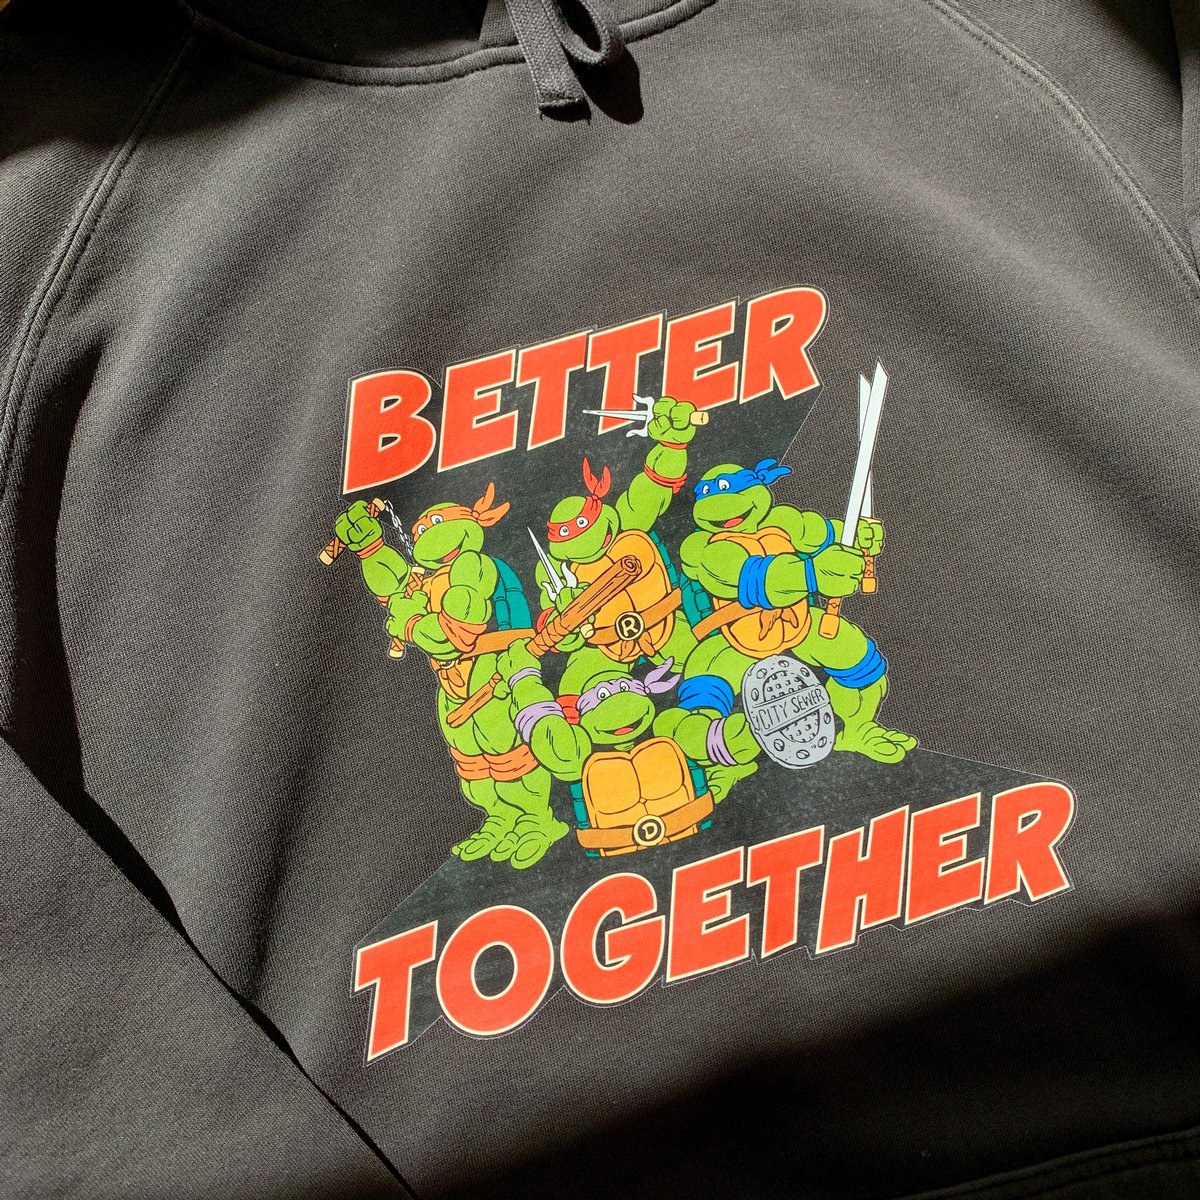 Shop P/C x TMNT 002 collection as part of our Graphic T-shirt program 💥⁠ ⁠ Available now in adult and youth sizes.